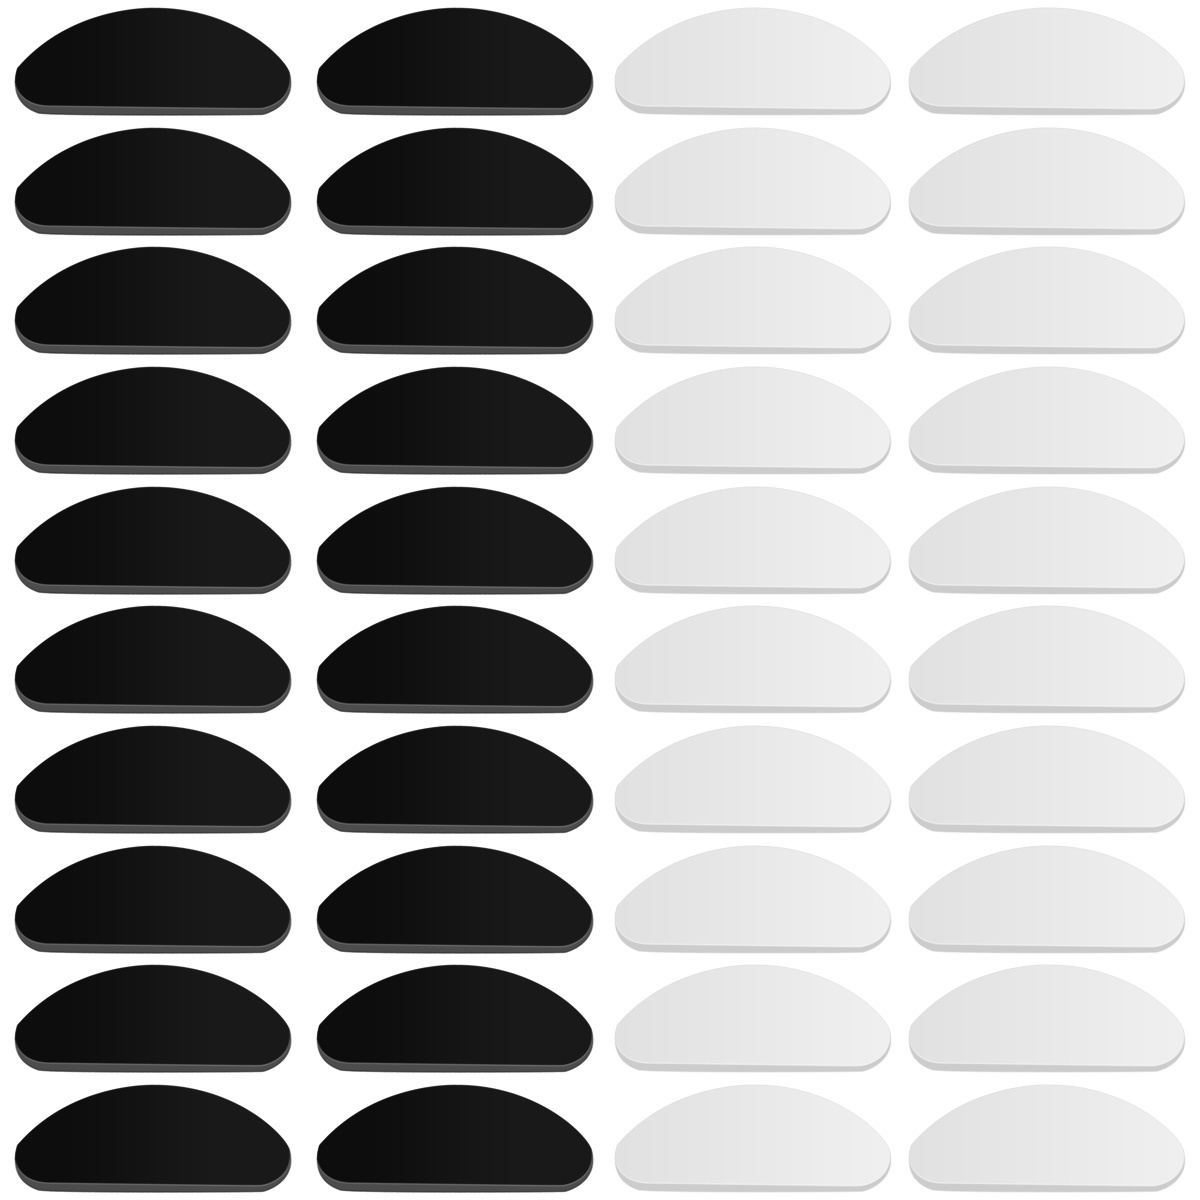 20 Pairs of Glasses Accessories Nose Pads - Soft Silicone, Self Stick Adhesive and Anti Slip